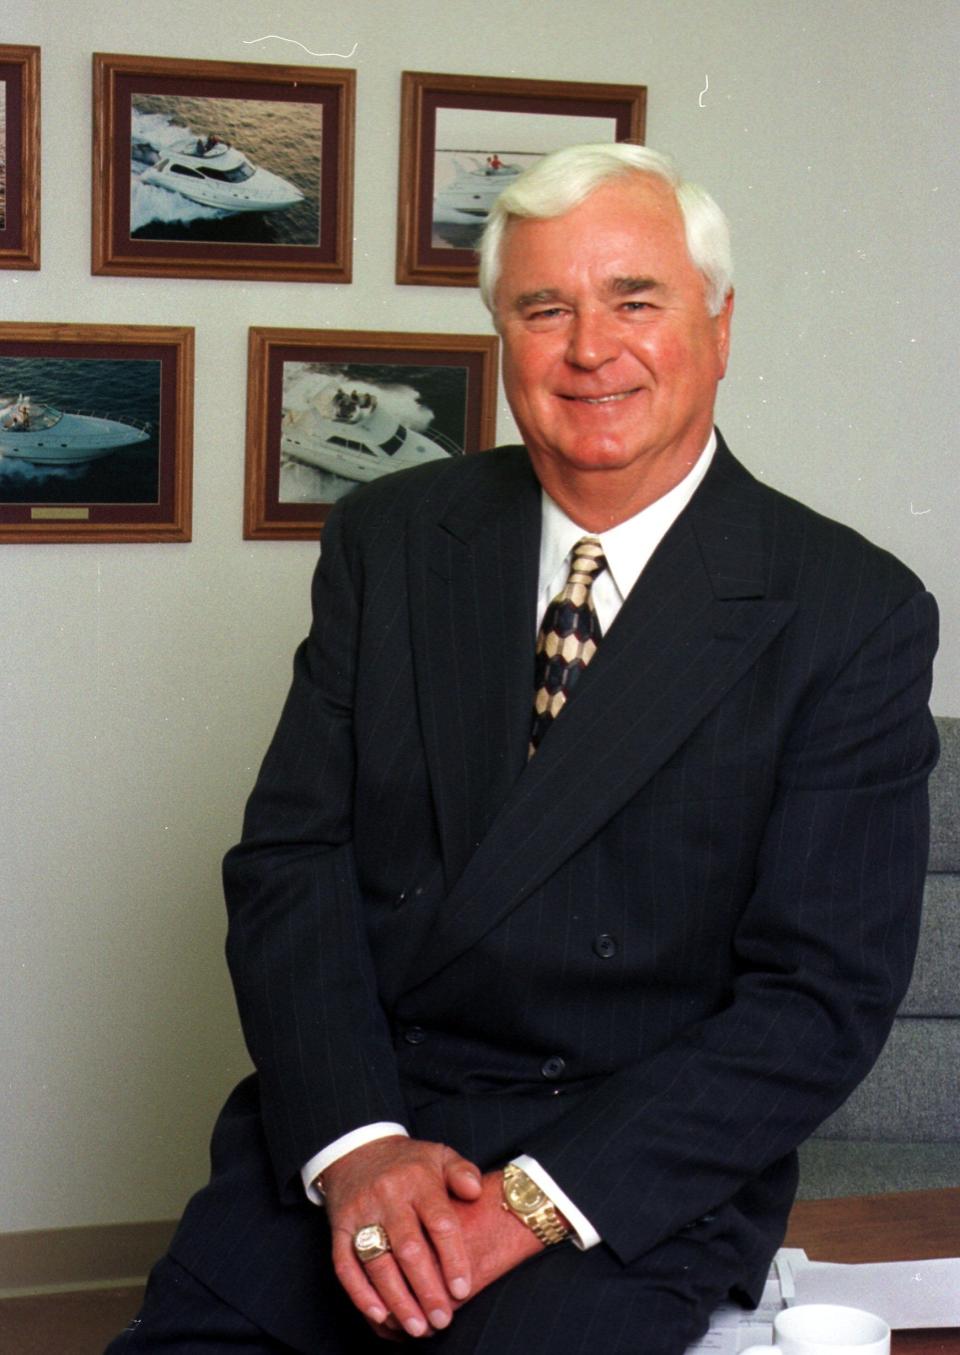 K.C. Stock in his Oconto office in 1999, when he was named Rotary Club of Green Bay's Free Enterprise Award recipient.